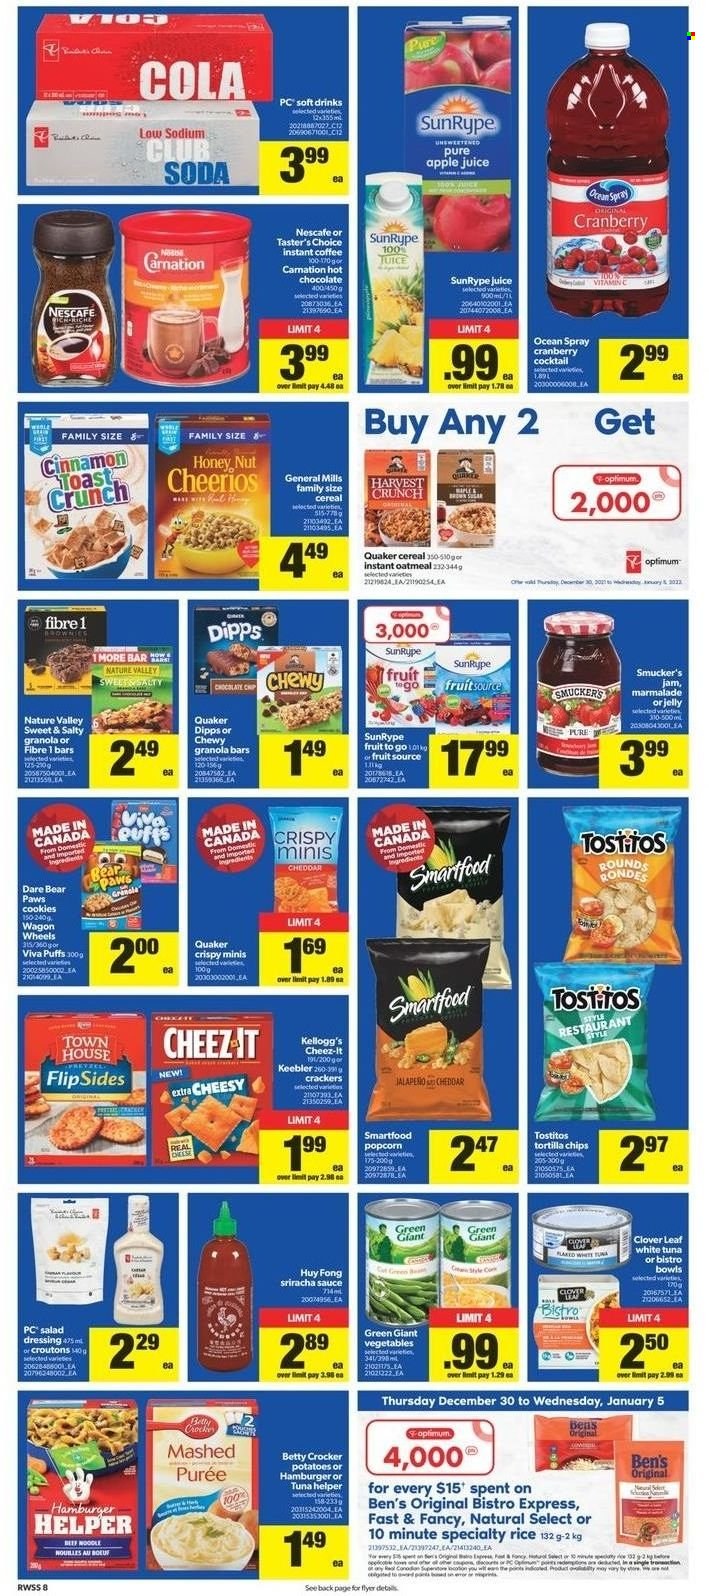 thumbnail - Real Canadian Superstore Flyer - December 30, 2021 - January 05, 2022 - Sales products - puffs, potatoes, jalapeño, tuna, Quaker, Clover, cookies, jelly, crackers, Kellogg's, Ego, Keebler, tortilla chips, Smartfood, popcorn, Cheez-It, Tostitos, croutons, oatmeal, cereals, Cheerios, granola bar, Nature Valley, cinnamon, salad dressing, sriracha, dressing, fruit jam, apple juice, juice, soft drink, hot chocolate, instant coffee, Paws, Optimum, wagon, chips, Nescafé. Page 8.